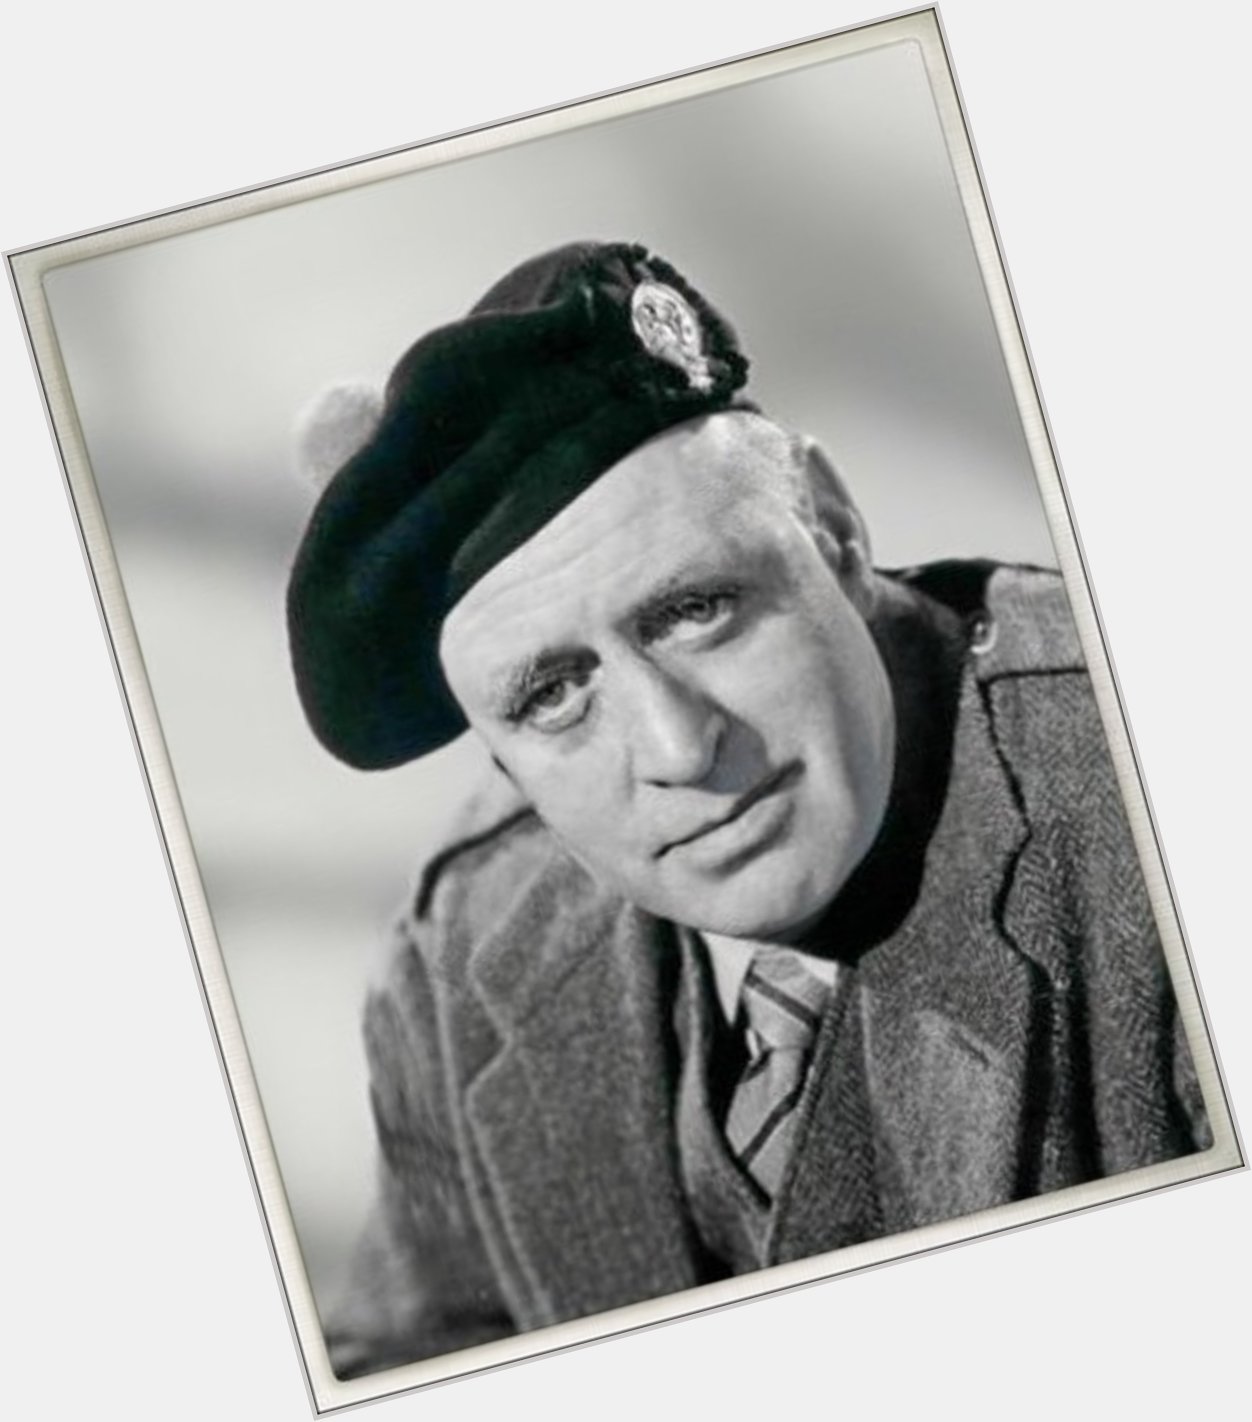 <a href="/hot-men/alastair-sim/is-he-george-cole-father-still-alive-where">Alastair Sim</a> Average body,  grey hair & hairstyles